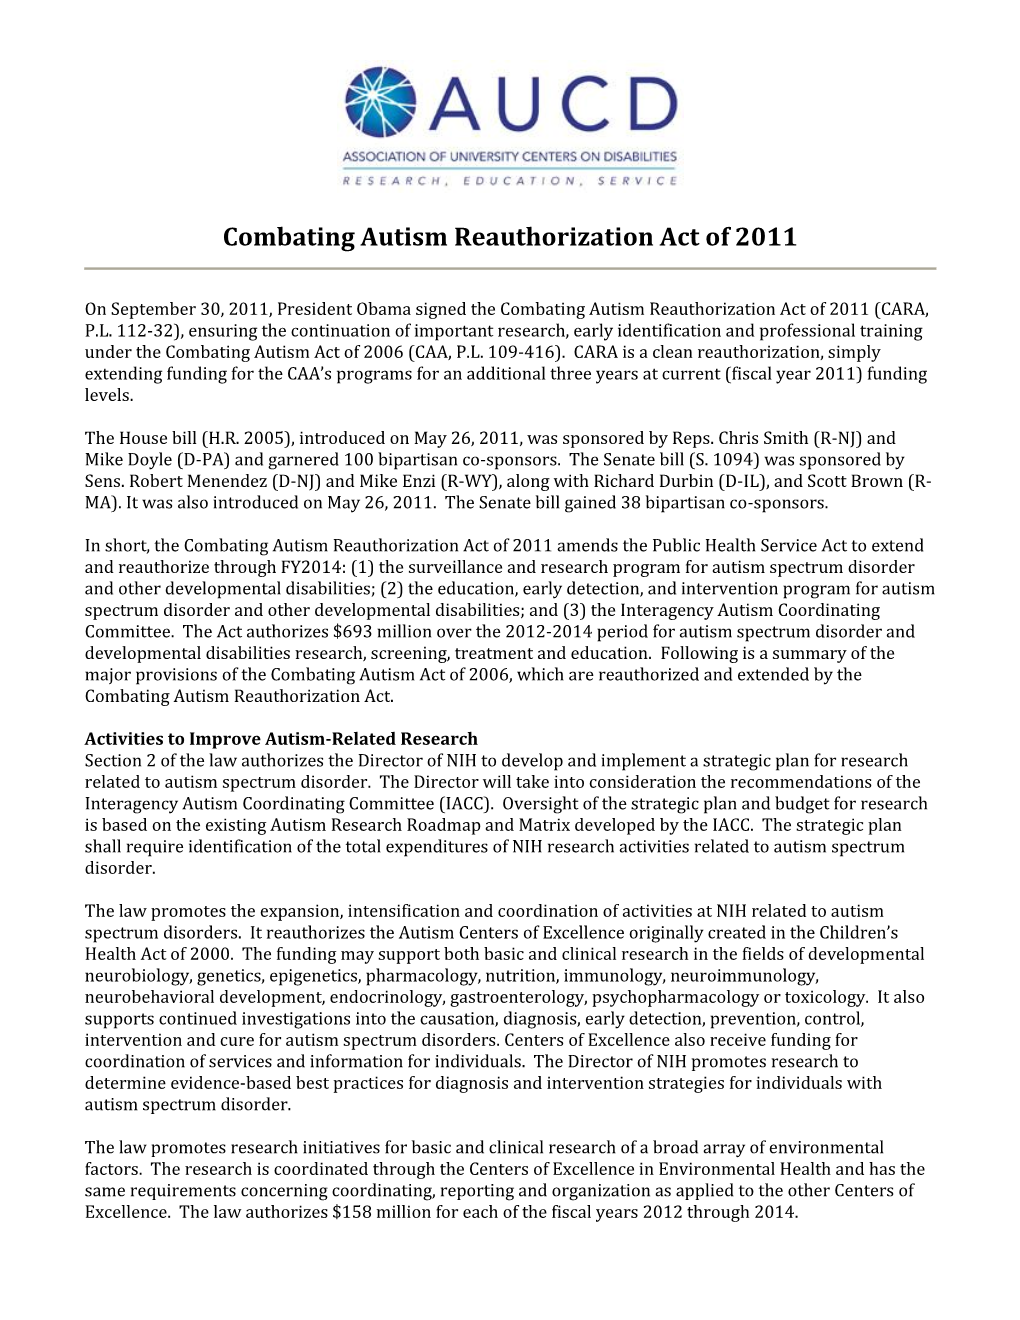 AUCD Summary Combating Autism Reauthorization Act of 2011